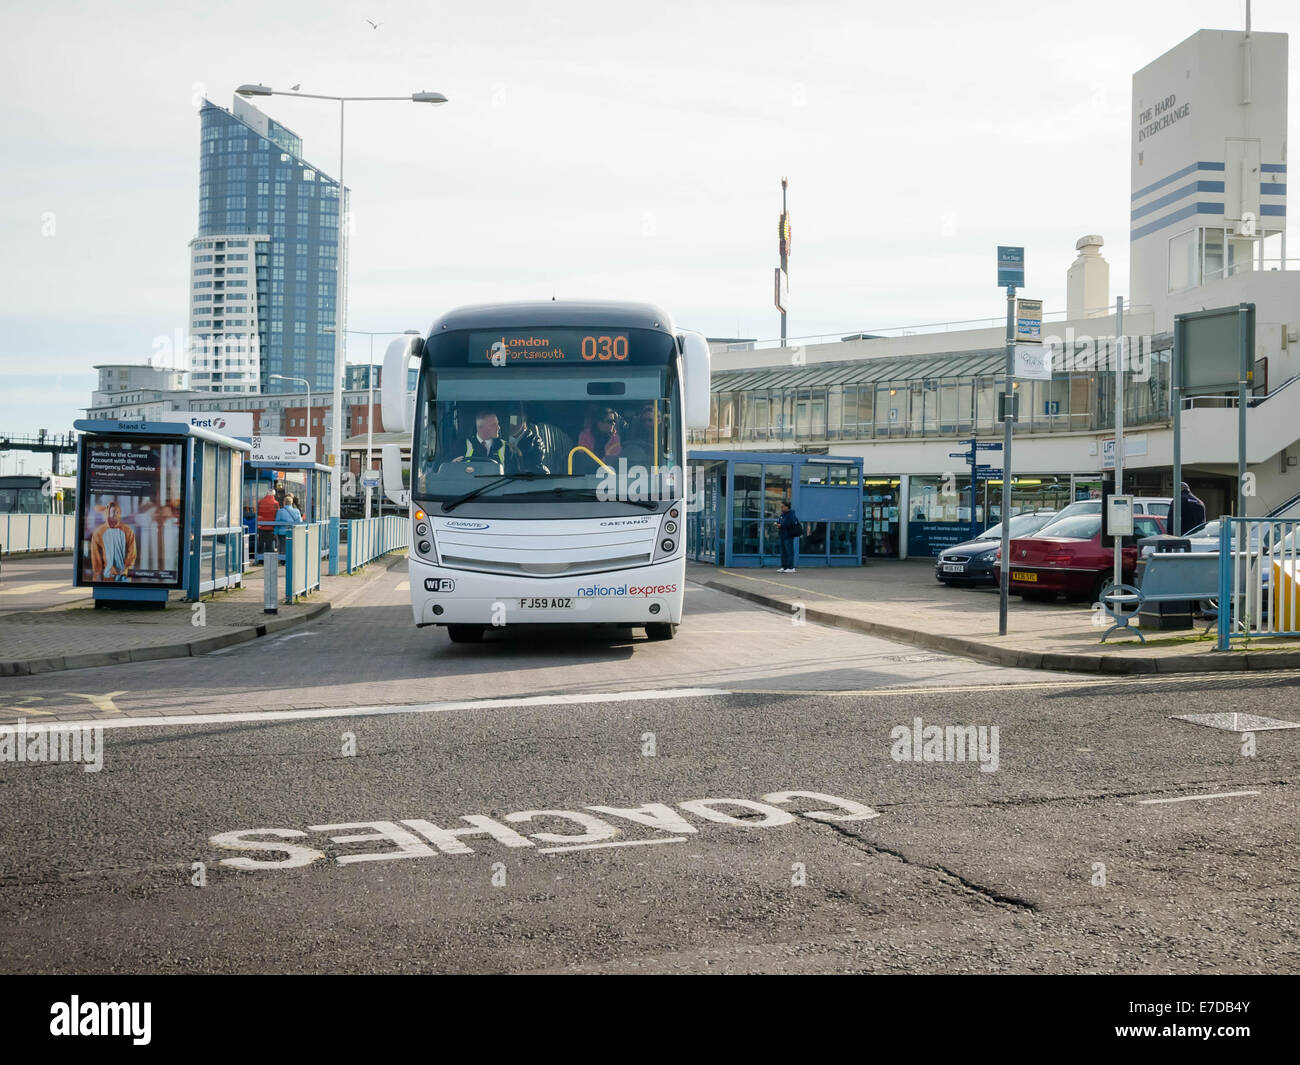 A National Express bus on the Hard interchange, Portsmouth, England ...